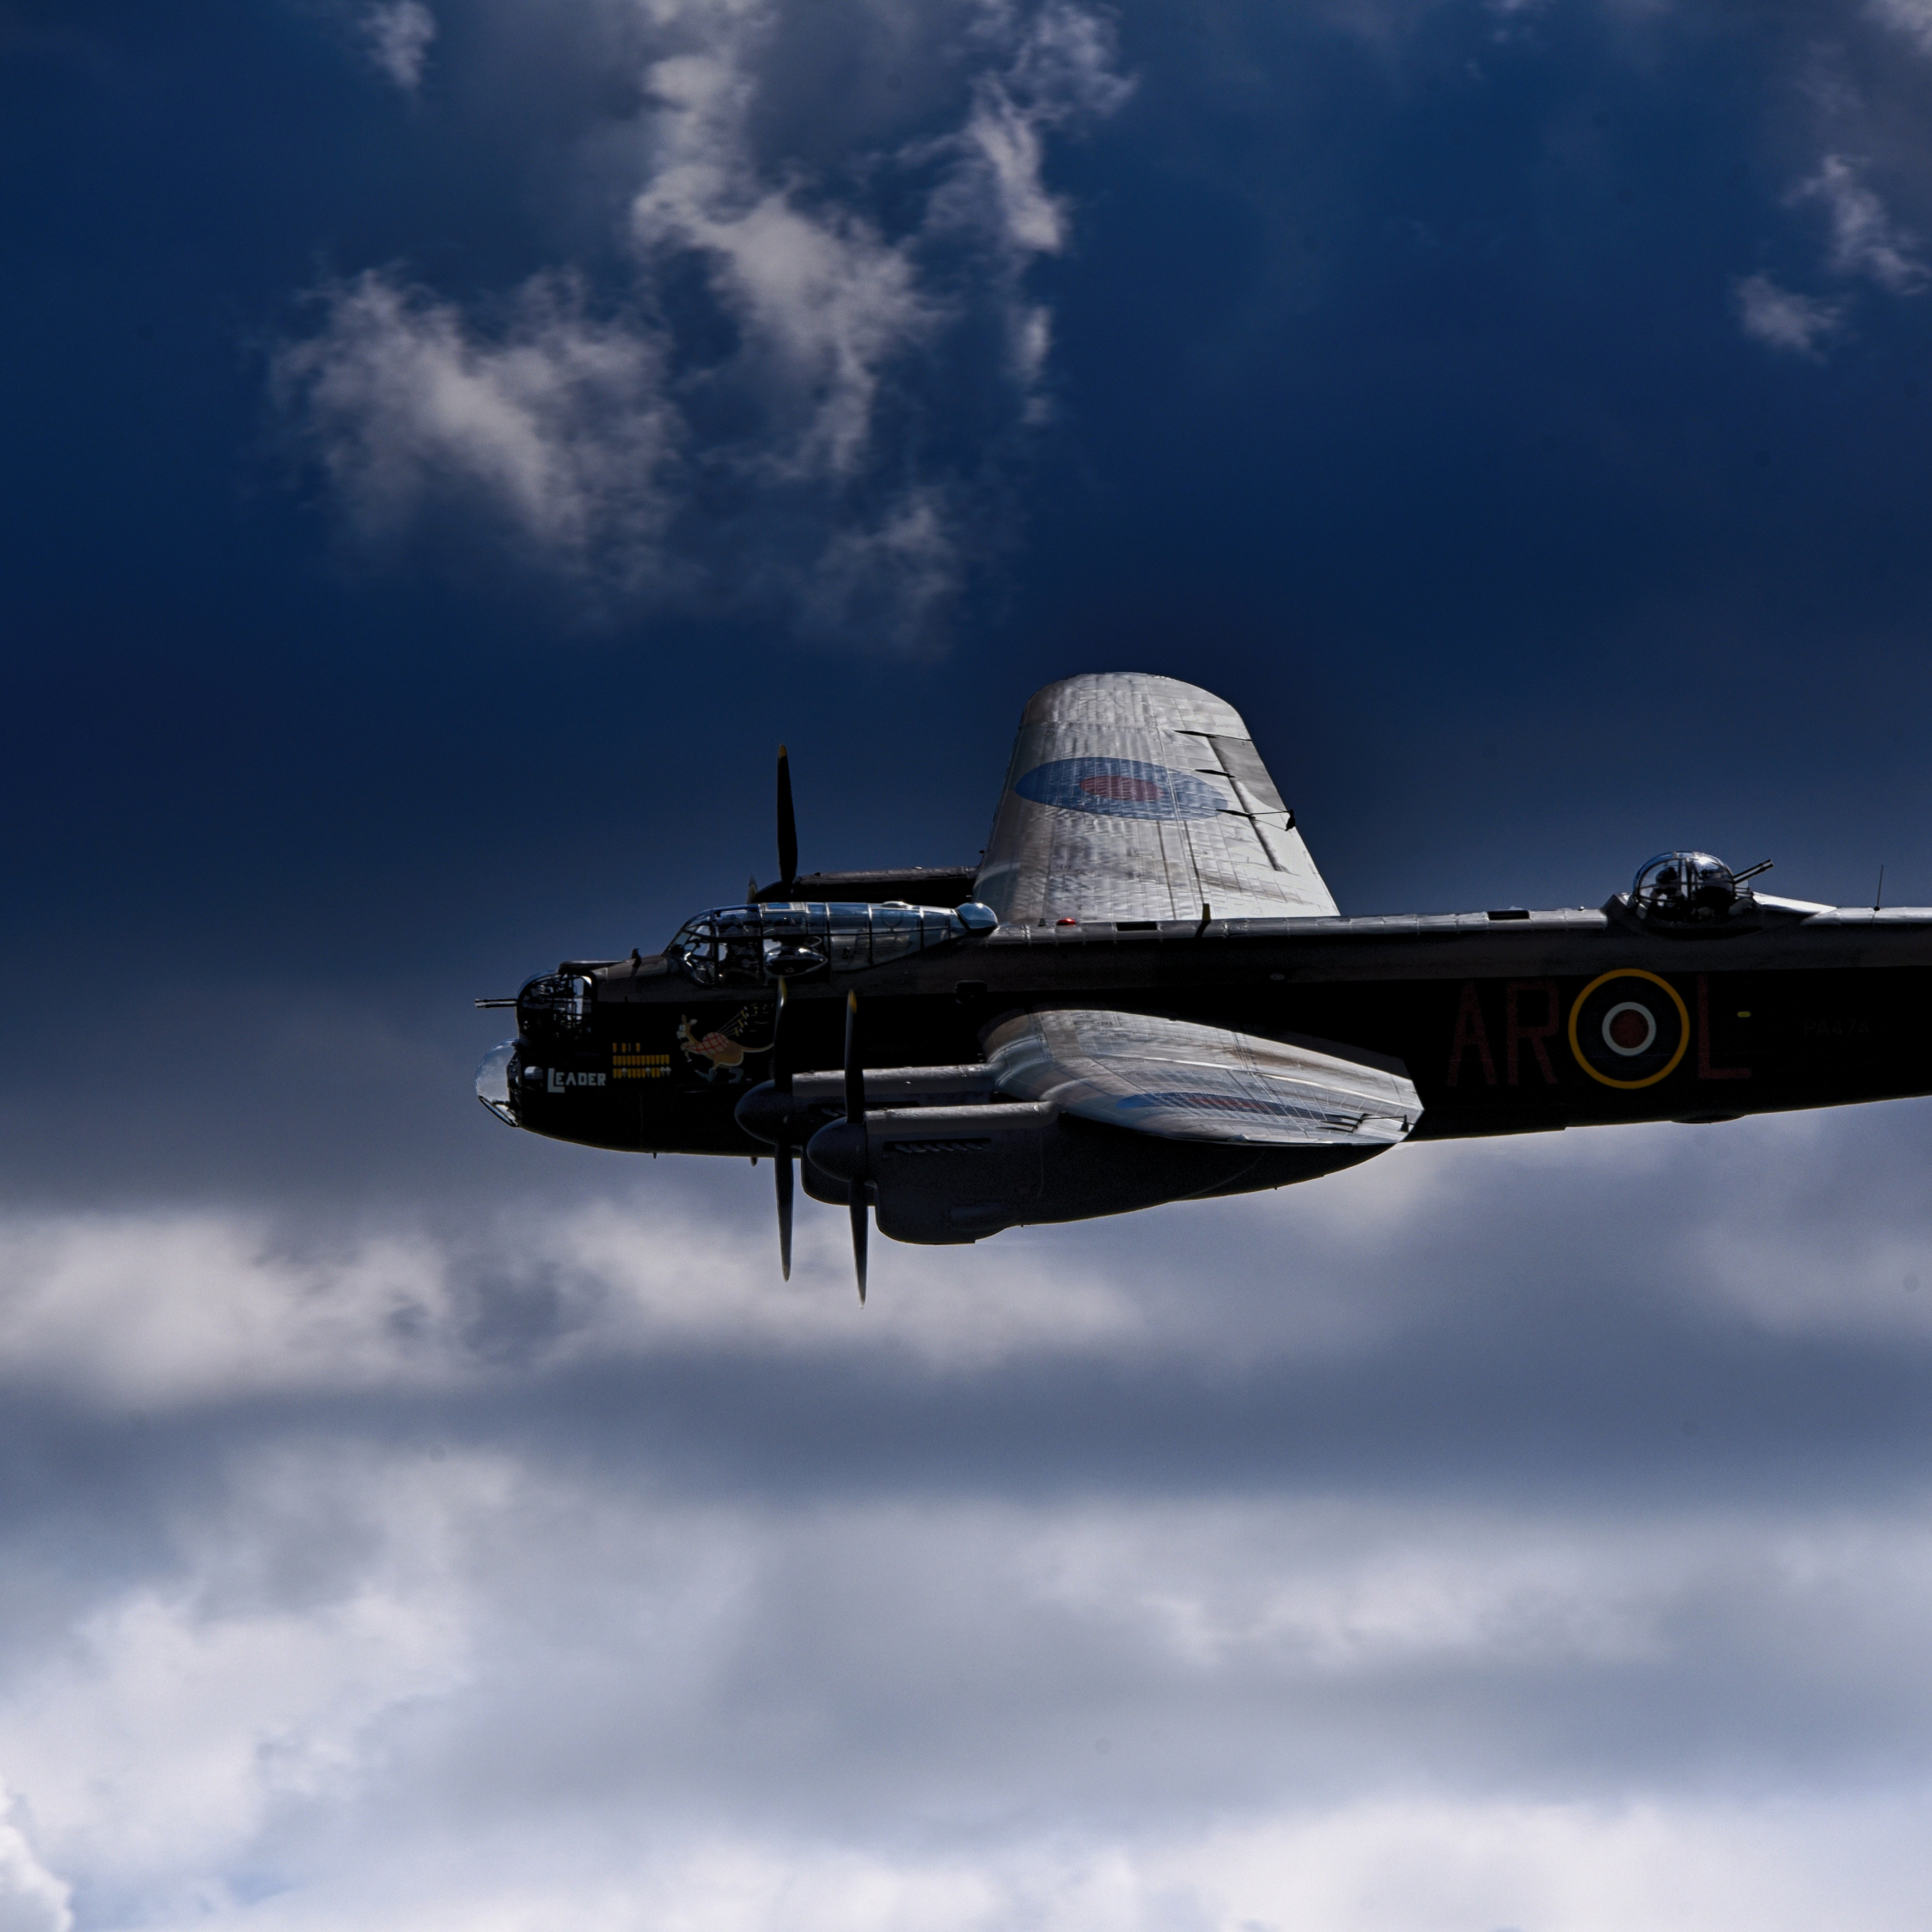 Download wallpaper 2248x2248 avro lancaster, fighter airplane, aircraft,  military, sky, ipad air, ipad air 2, ipad 3, ipad 4, ipad mini 2, ipad mini  3, 2248x2248 hd background, 814